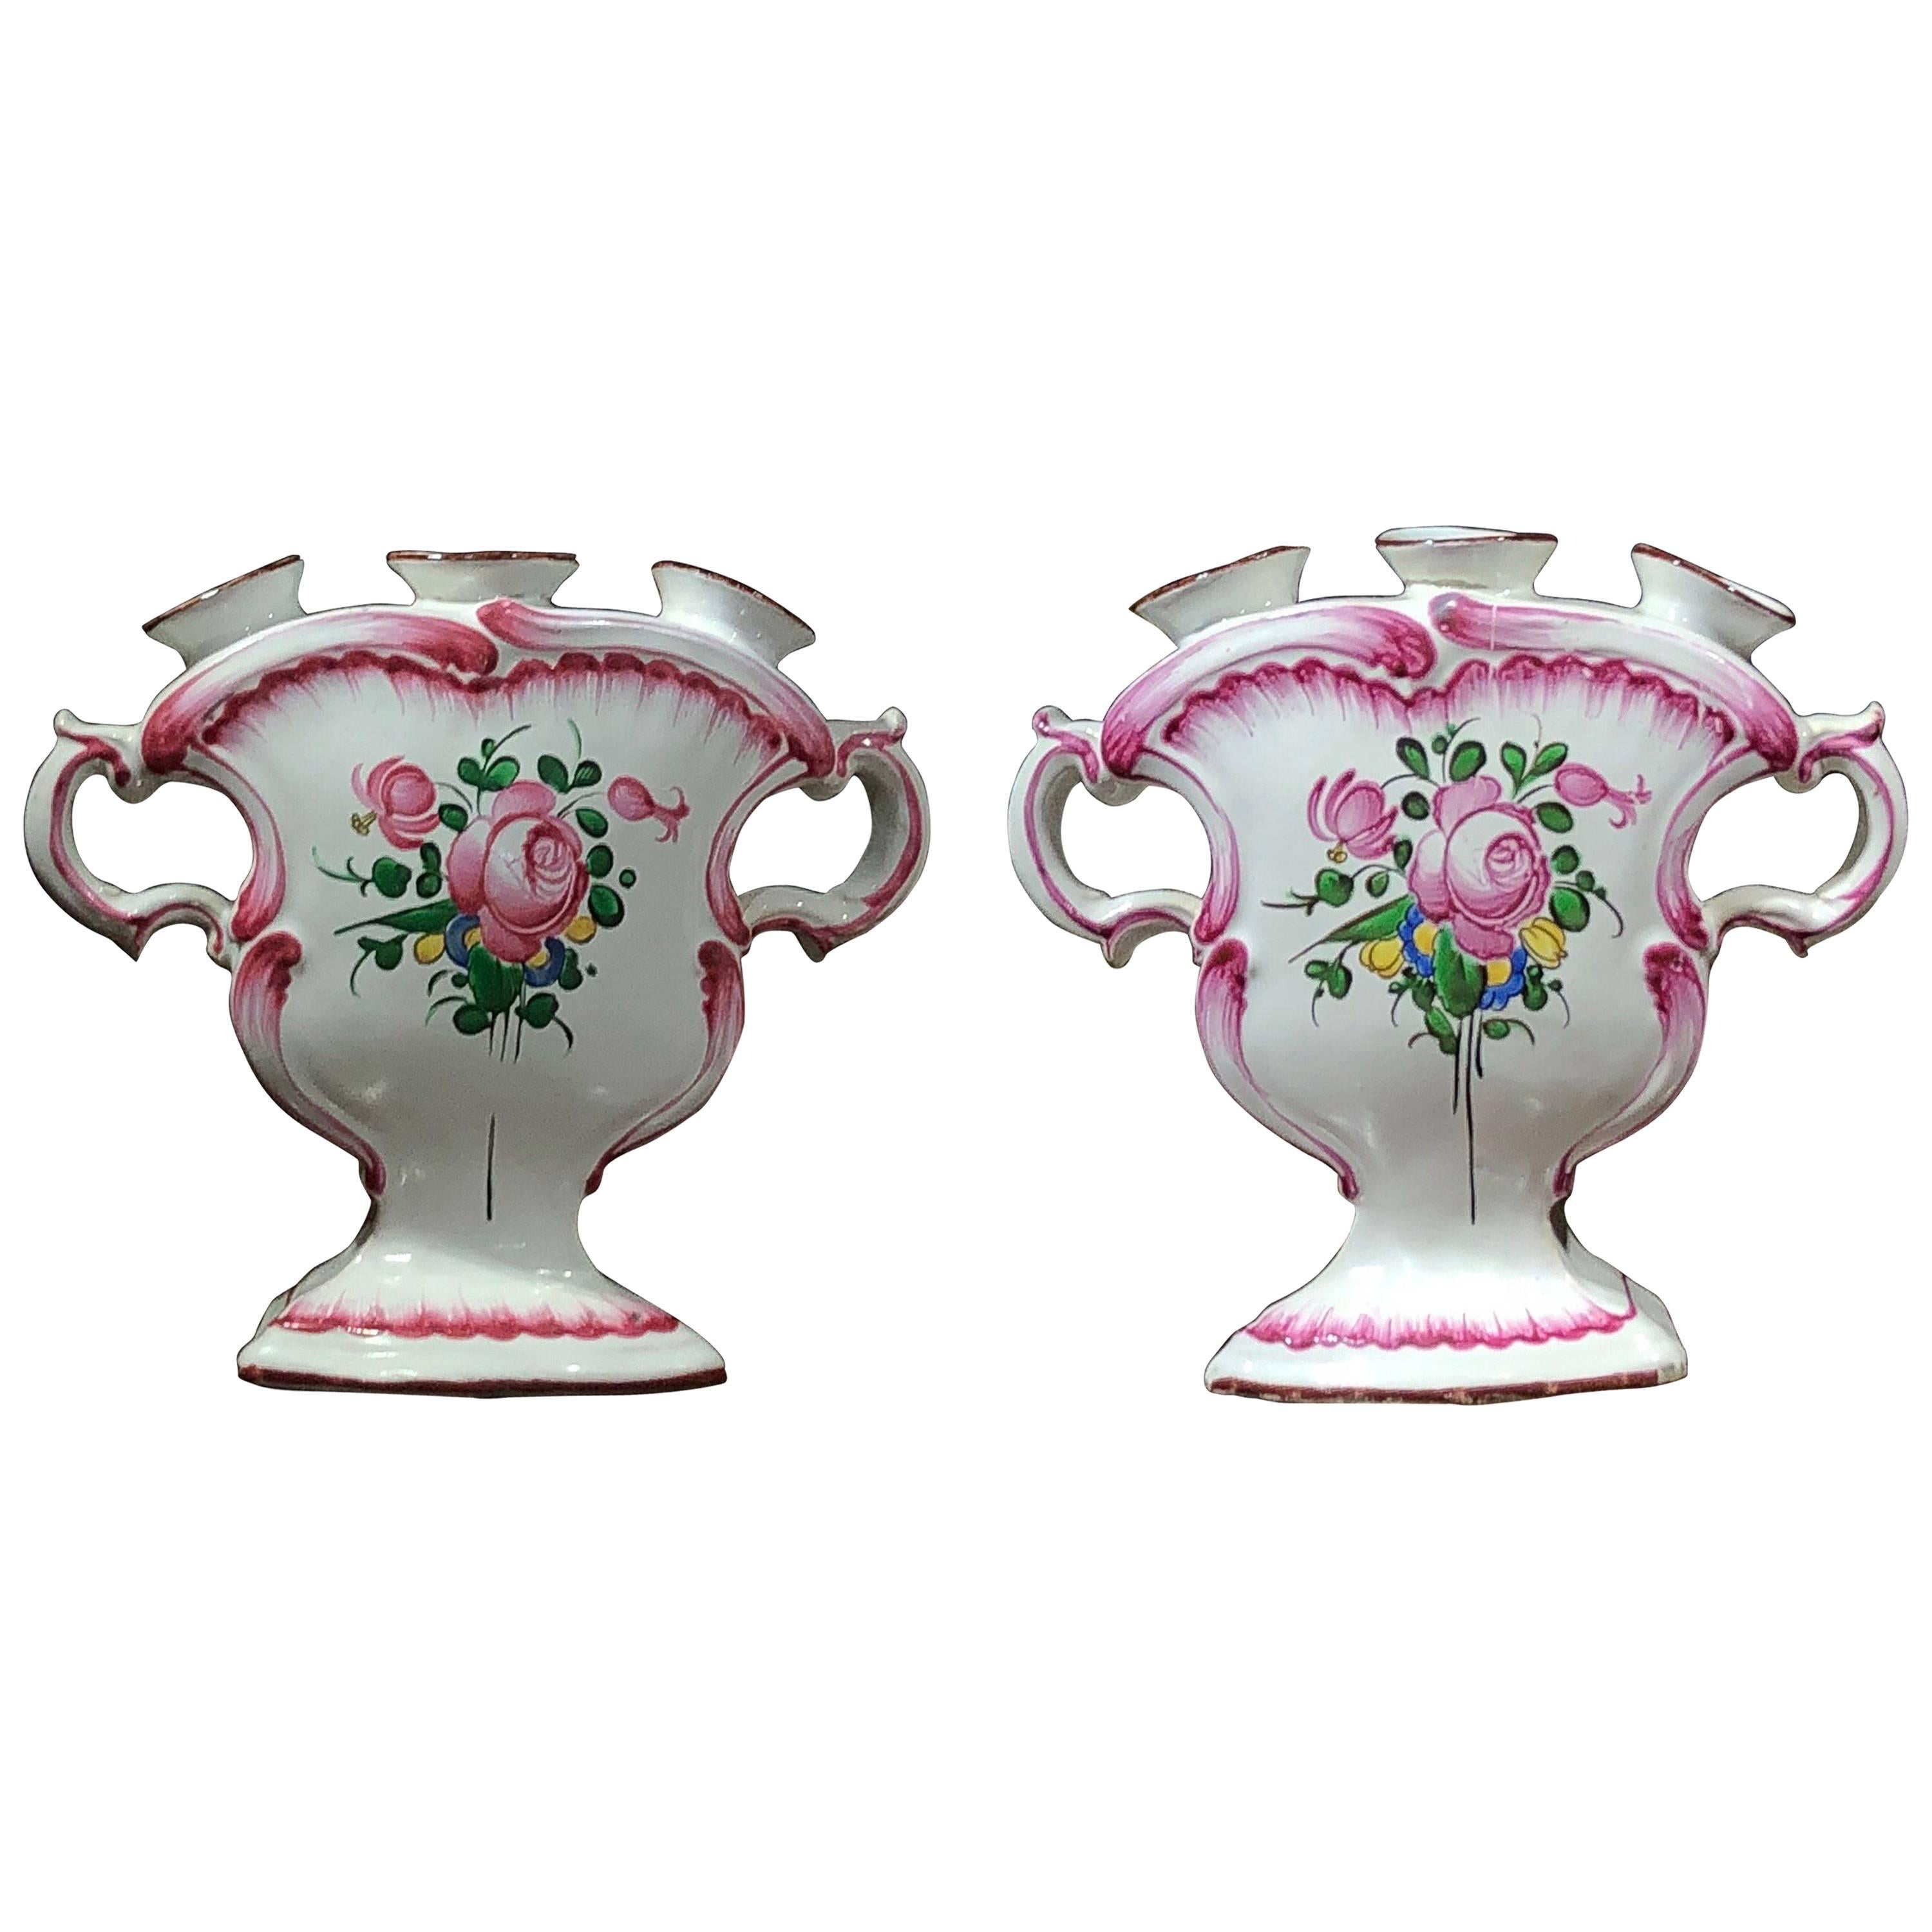 Pair of French Faience Tulip Vases, Prob. Luneville, 19th Century